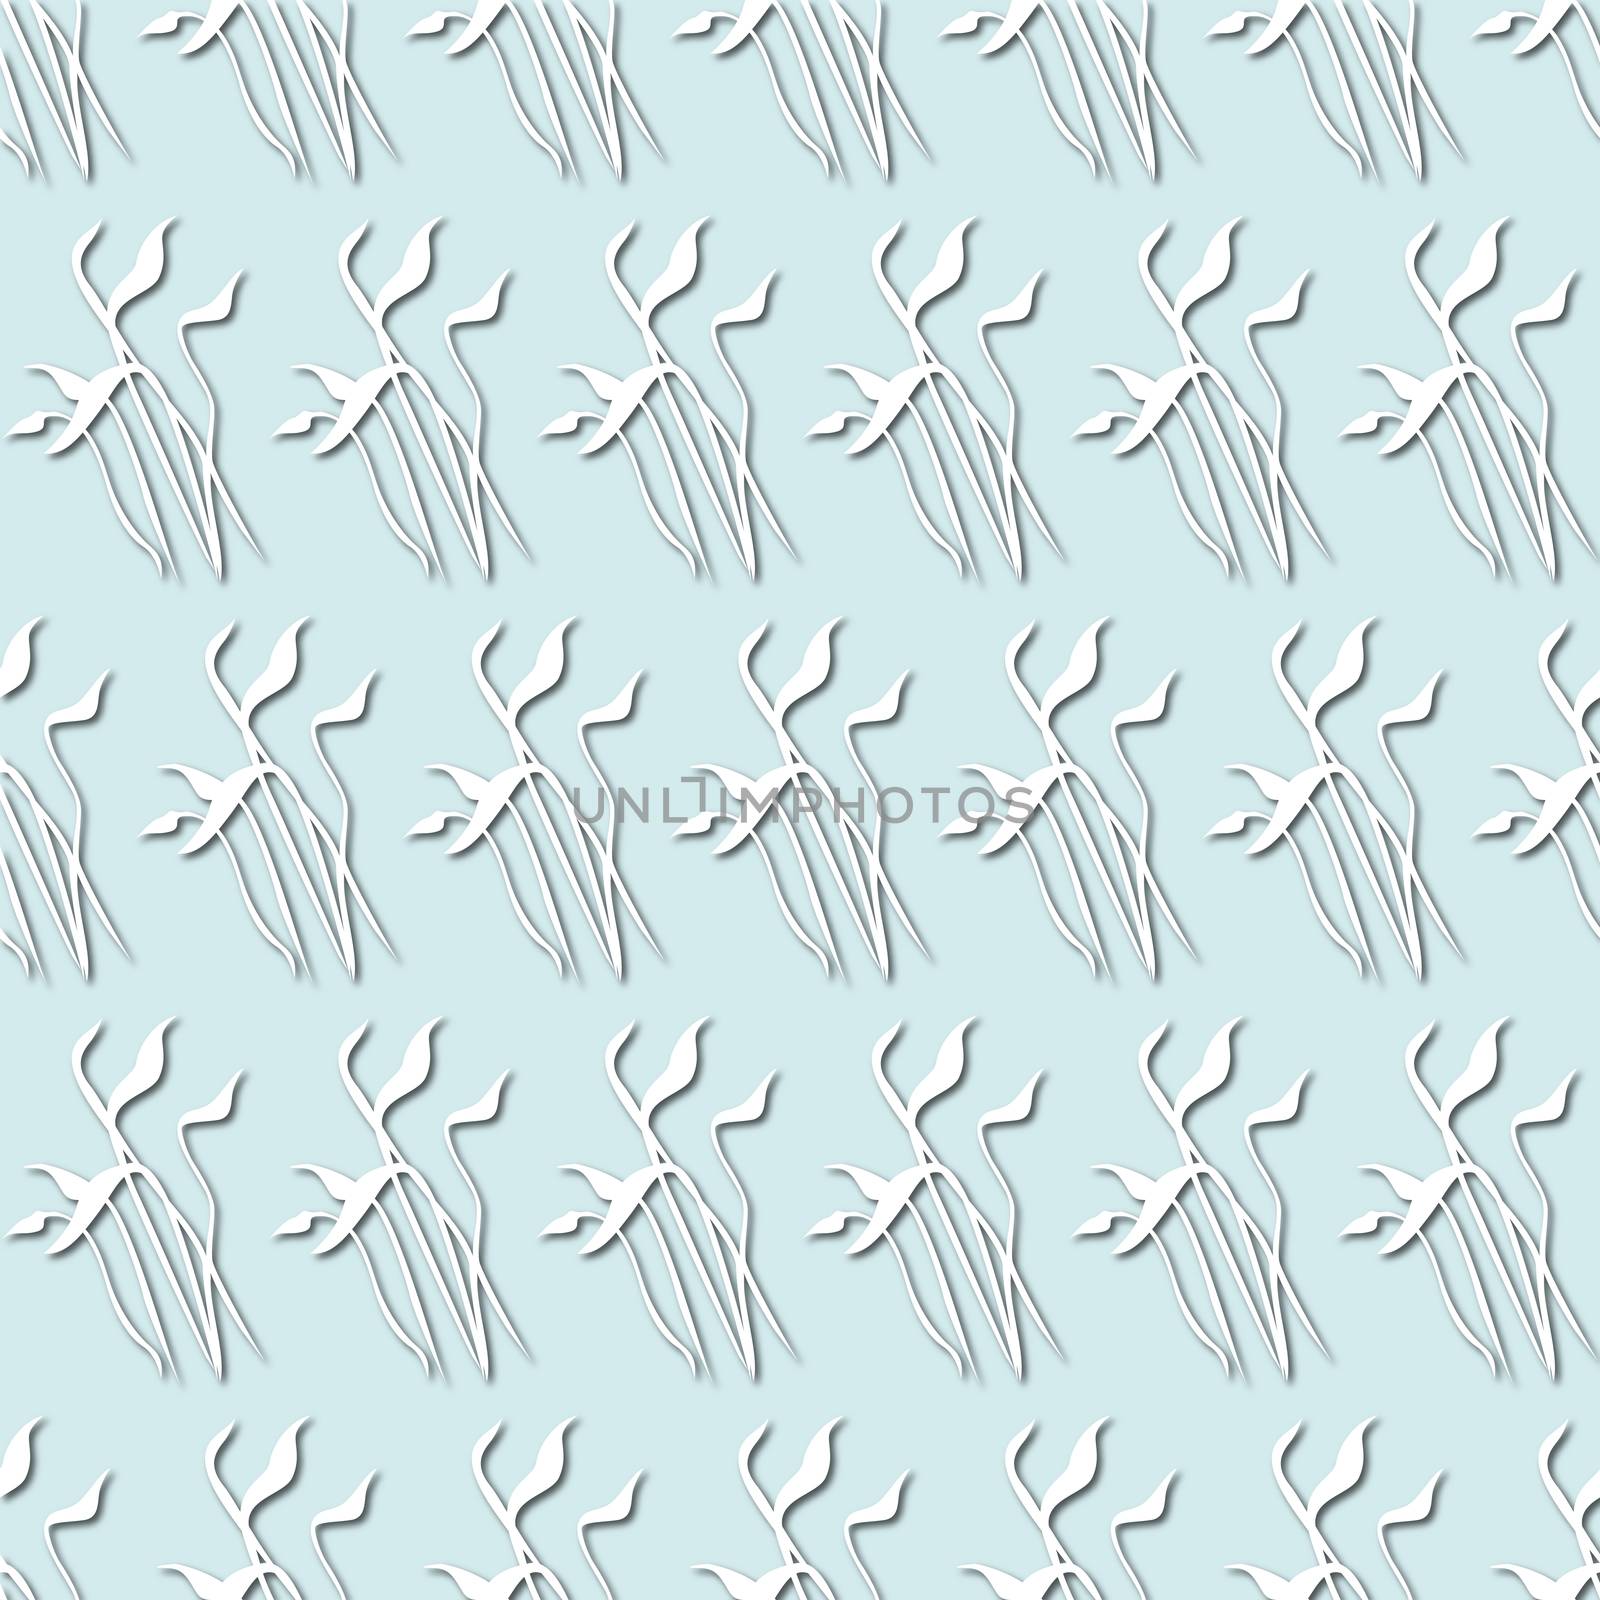 White plant, flowers silhouette on pale blue background, seamless pattern. Paper cut style by Pashchenko